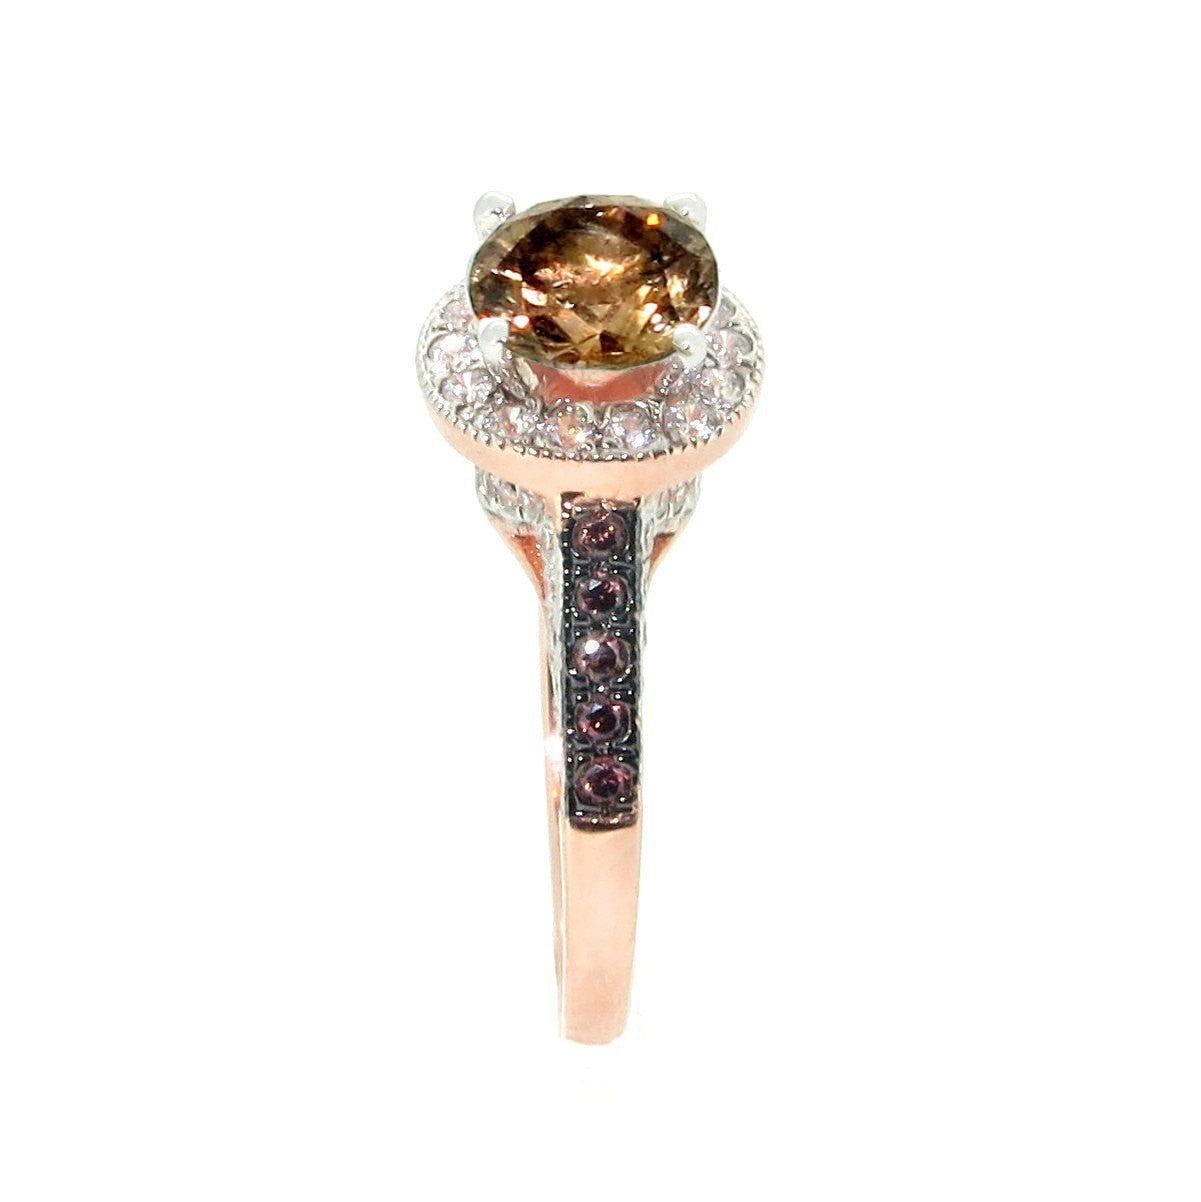 1 Carat Fancy Brown Smoky Quartz Floating Halo Rose Gold, White & Fancy Brown Diamond Accent Stones Engagement Ring, Anniversary Ring - SQ94613